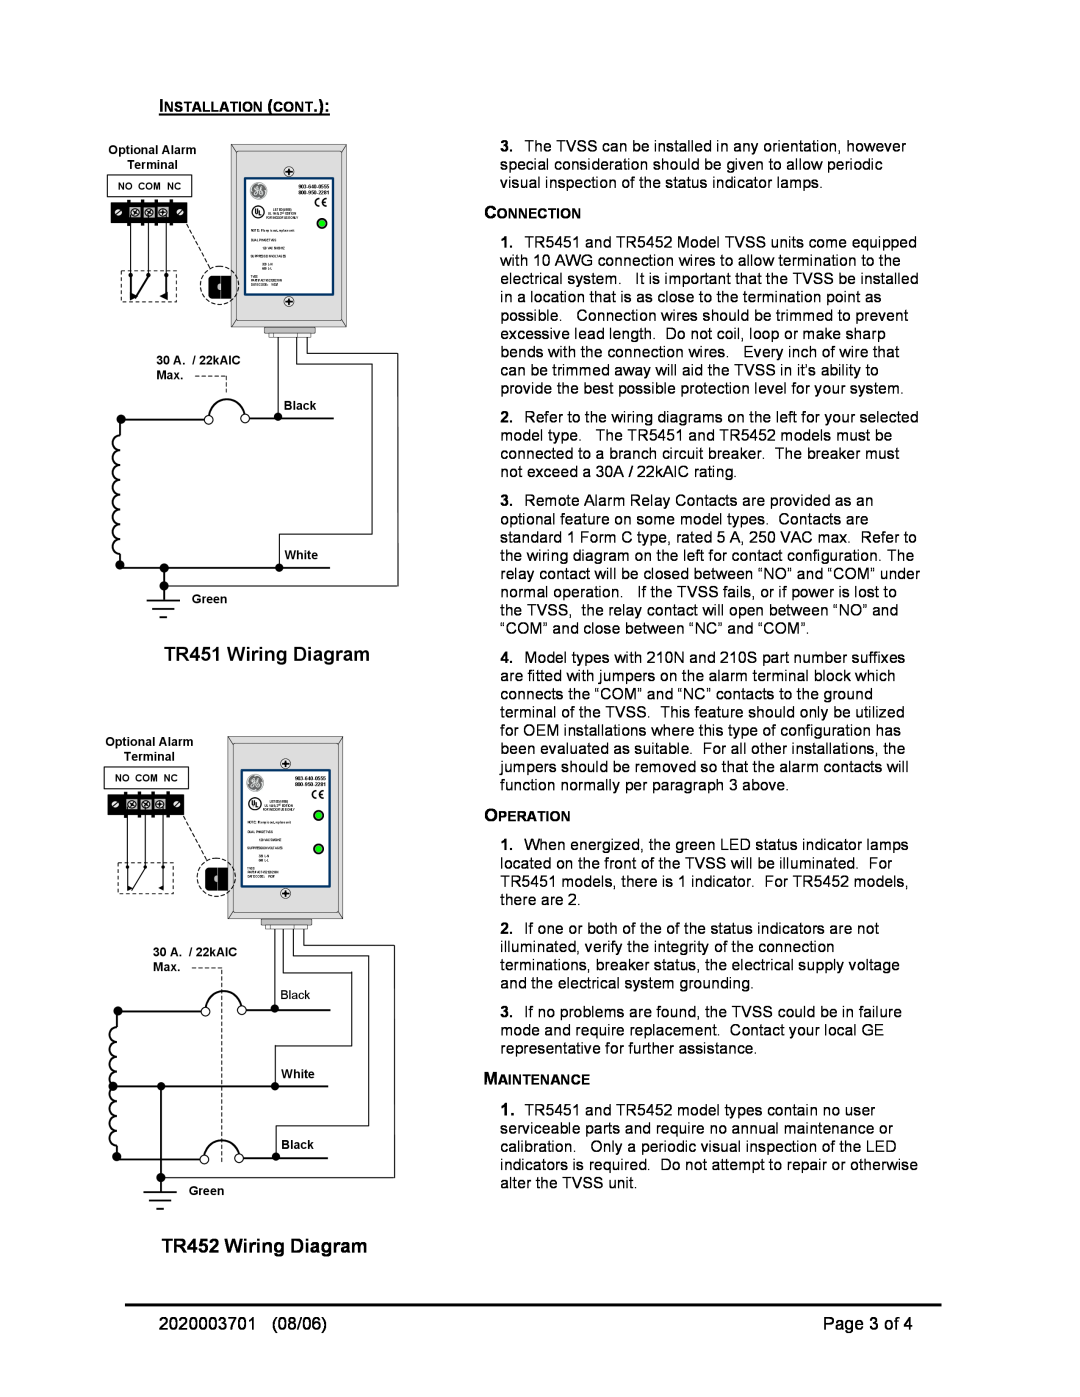 GE TR5452, TR5451 TR451 Wiring Diagram, TR452 Wiring Diagram, Page 3 of, 2020003701 08/06, Installation Cont, Connection 